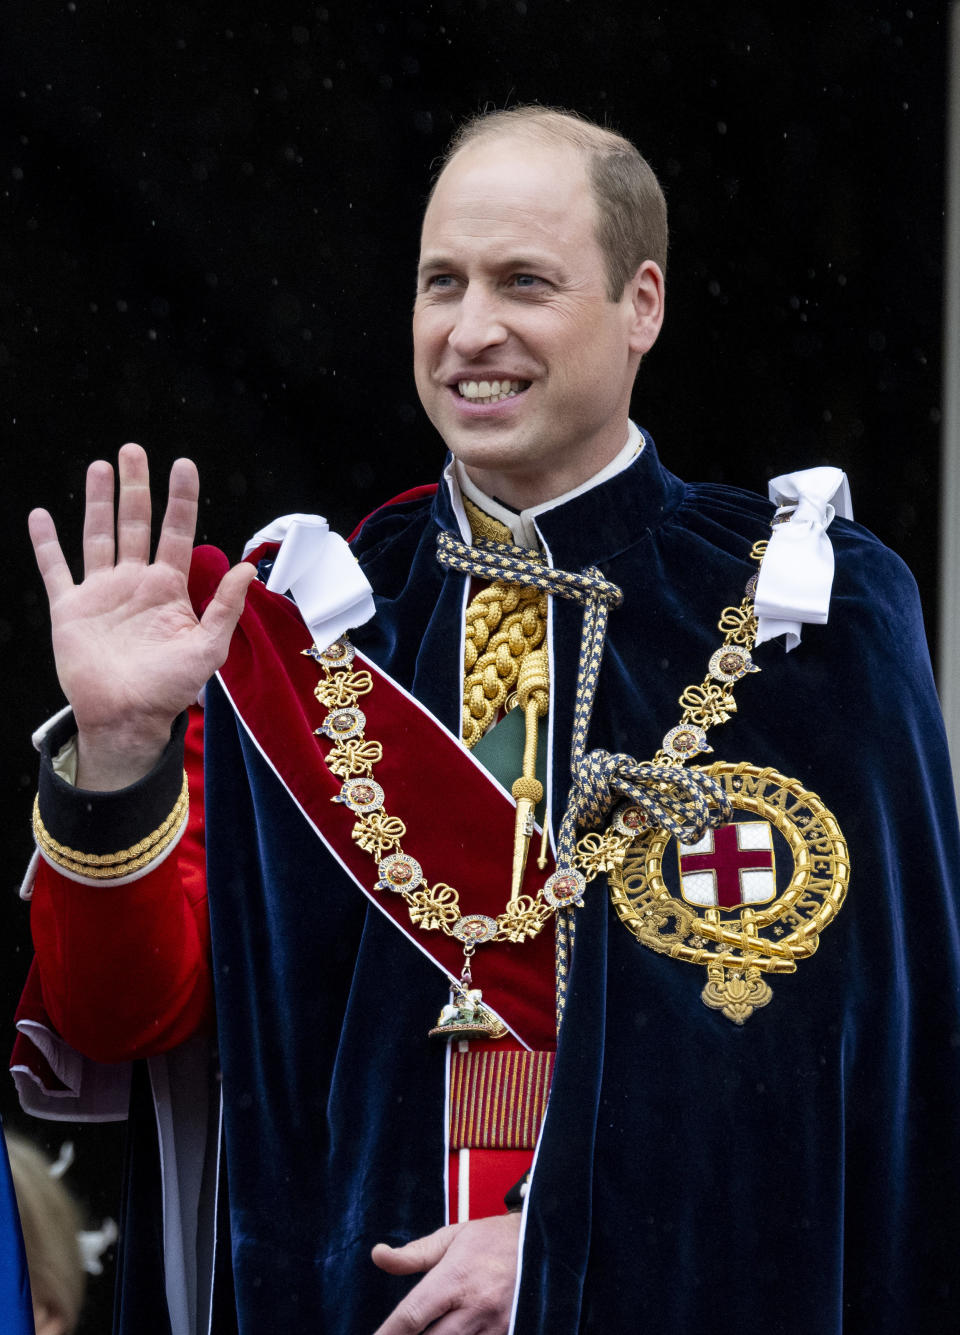 william waving with a balding head